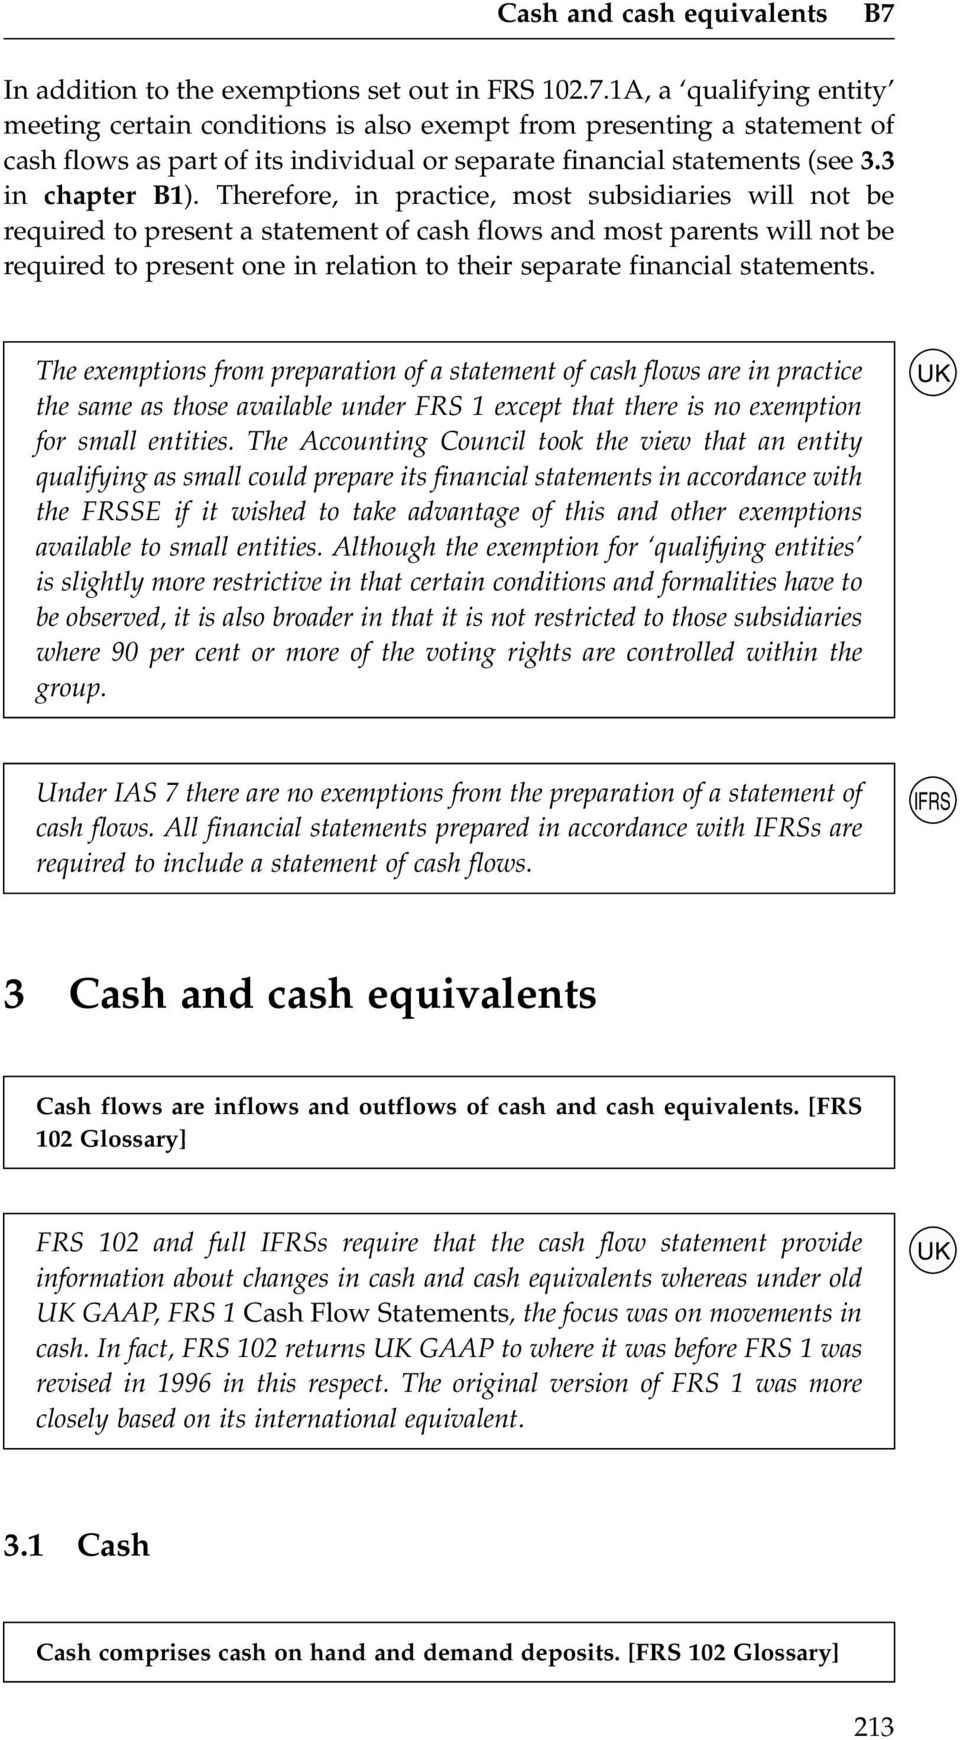 1A, a qualifying entity meeting certain conditions is also exempt from presenting a statement of cash flows as part of its individual or separate financial statements (see 3.3 in chapter B1).